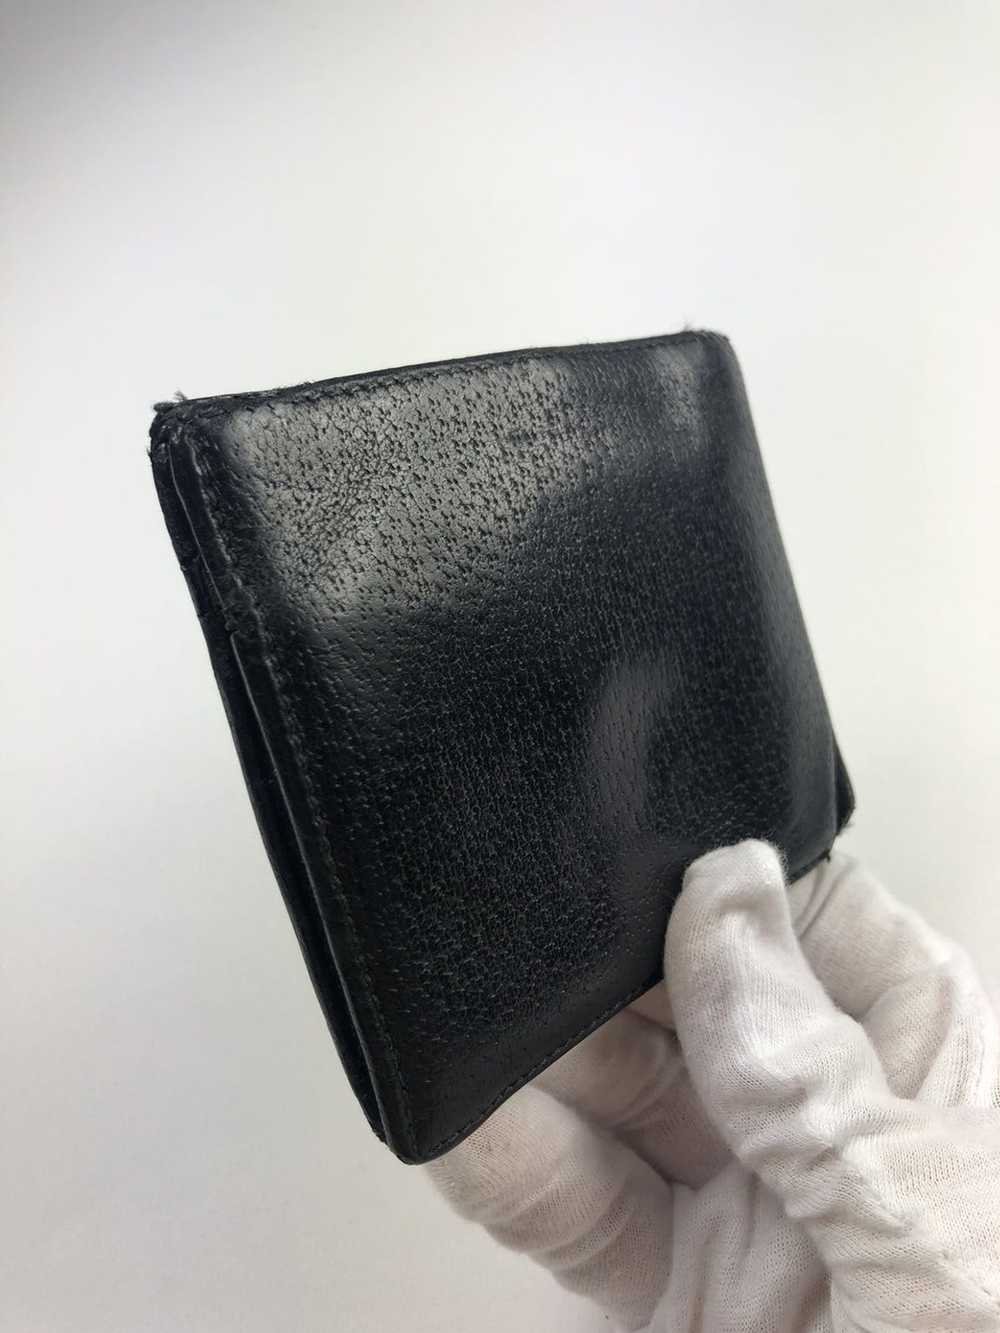 Gucci Gucci crest leather bifold wallet - image 10